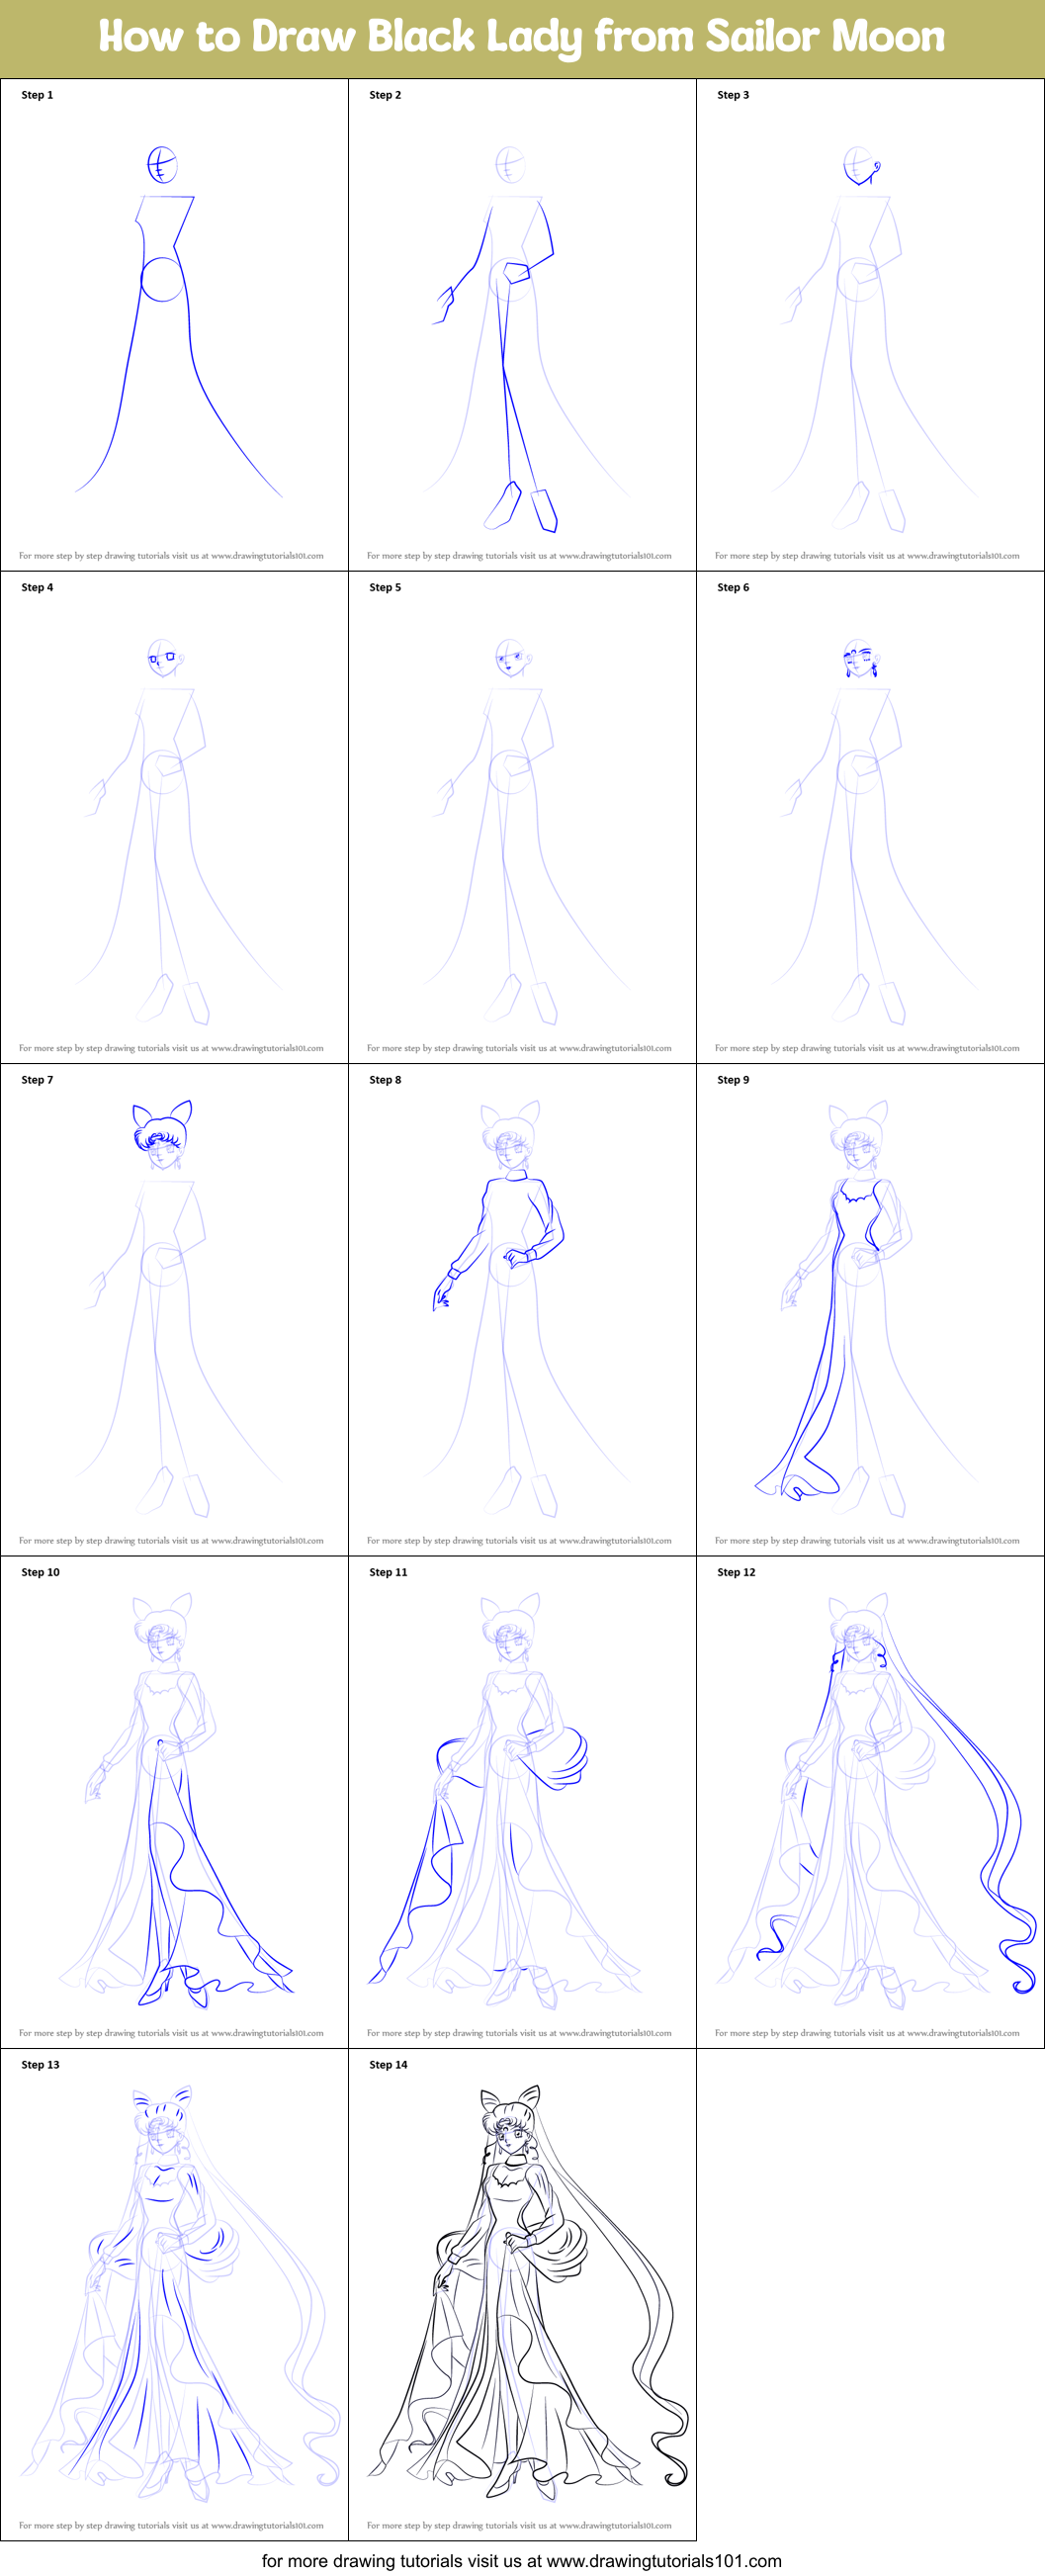 How to Draw Black Lady from Sailor Moon printable step by step drawing